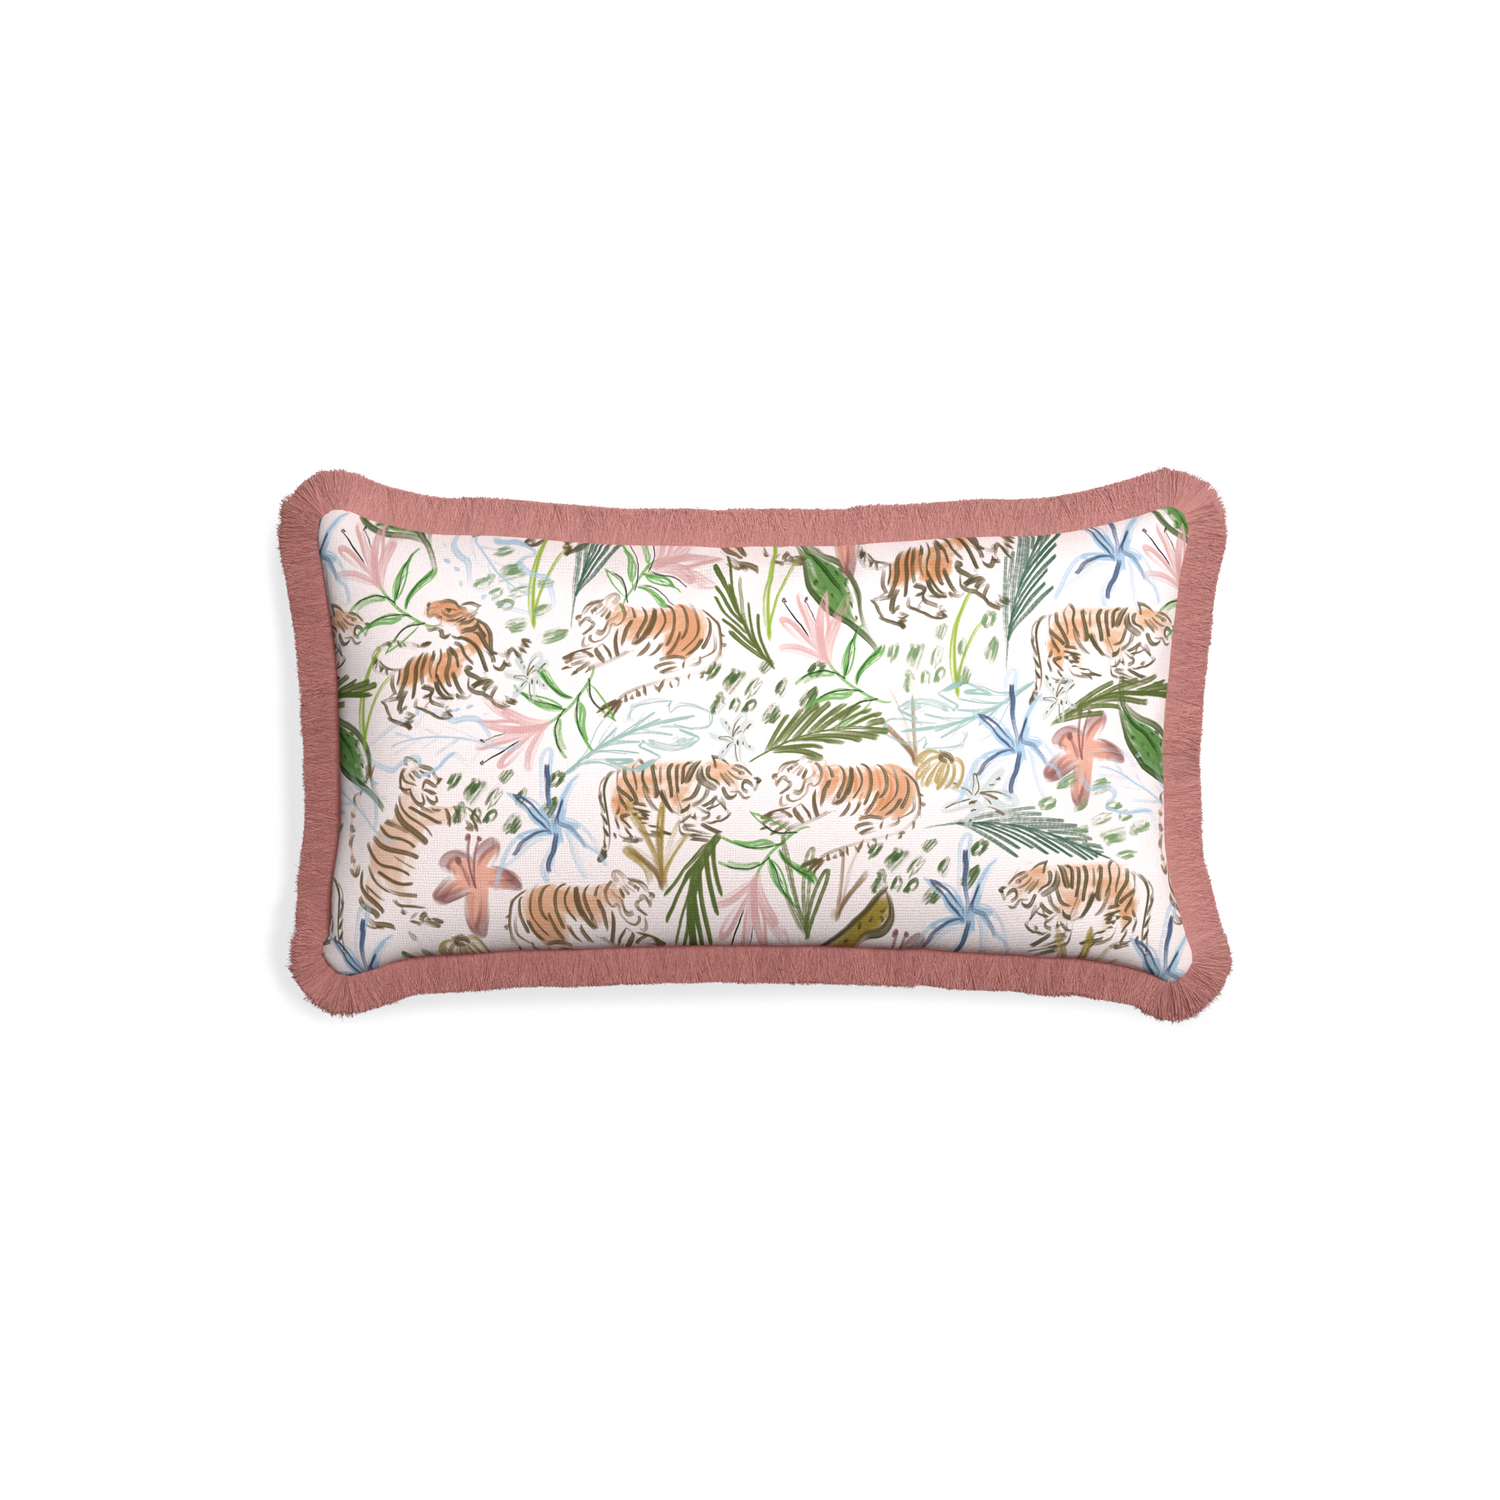 Petite-lumbar frida pink custom pink chinoiserie tigerpillow with d fringe on white background